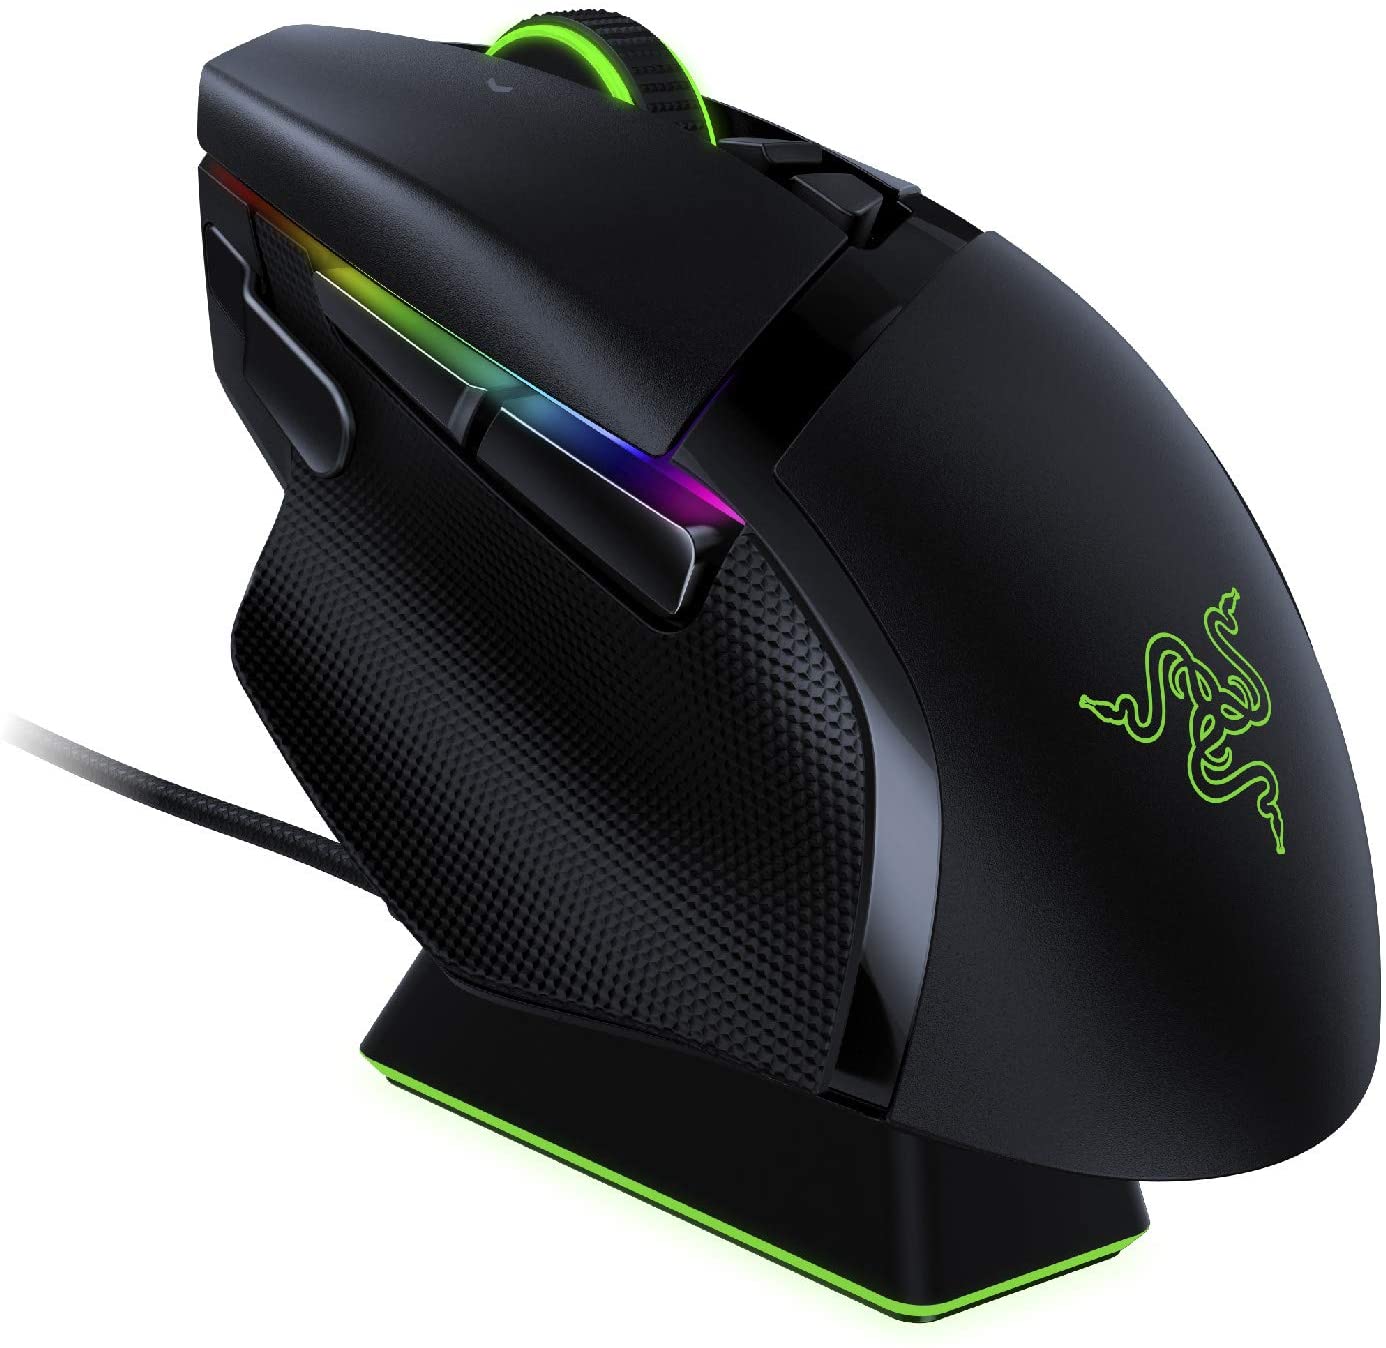 Wired vs. wireless gaming mouse: Pros and cons - Dot Esports